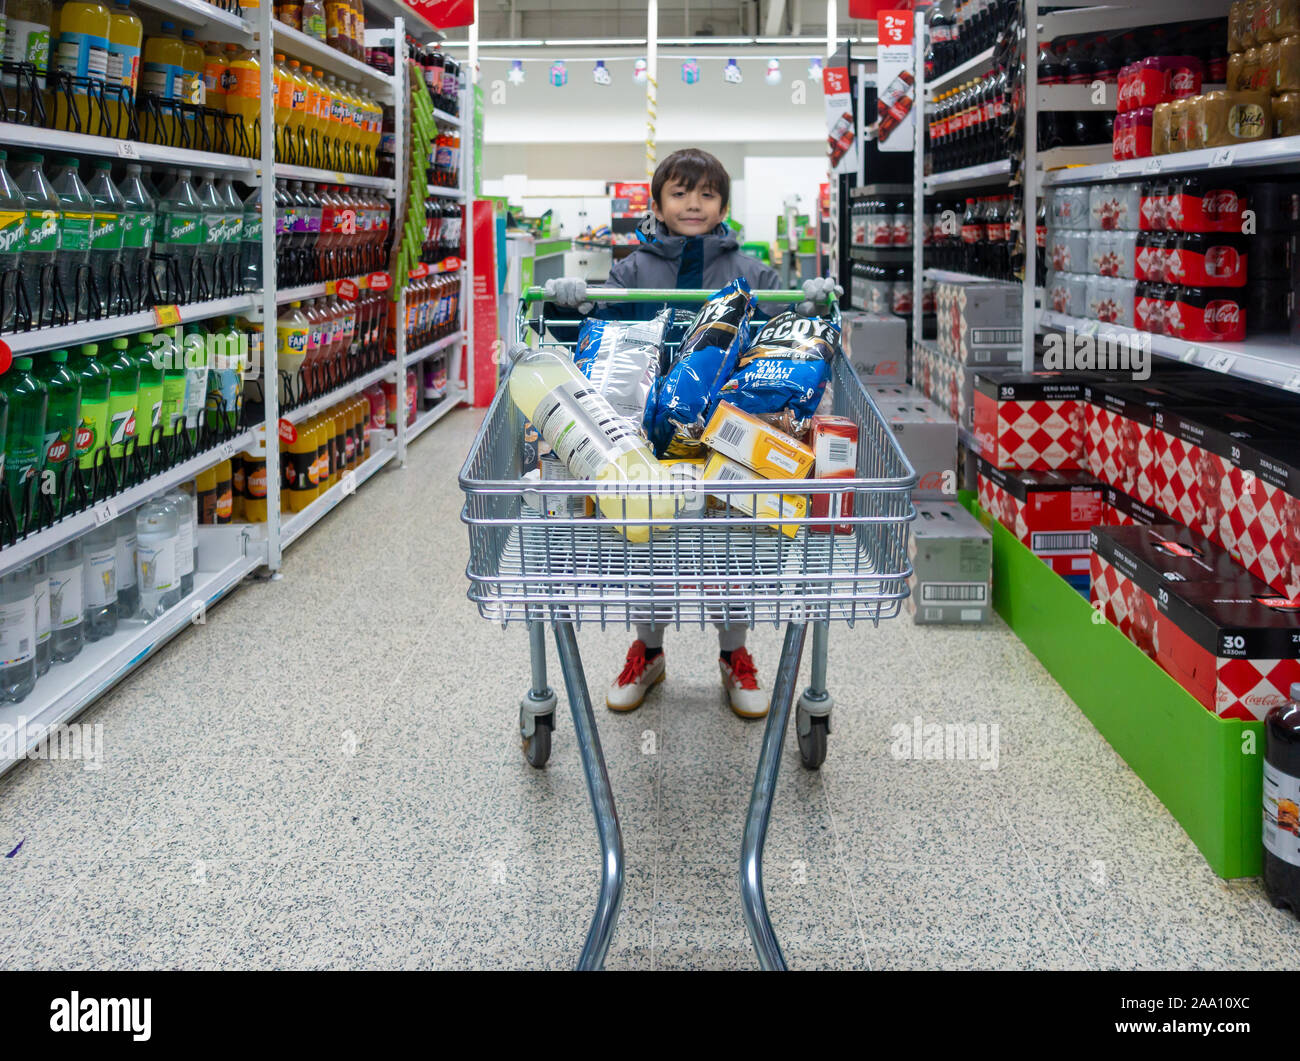 A young boy pushes a trolley around a supermarket Stock Photo